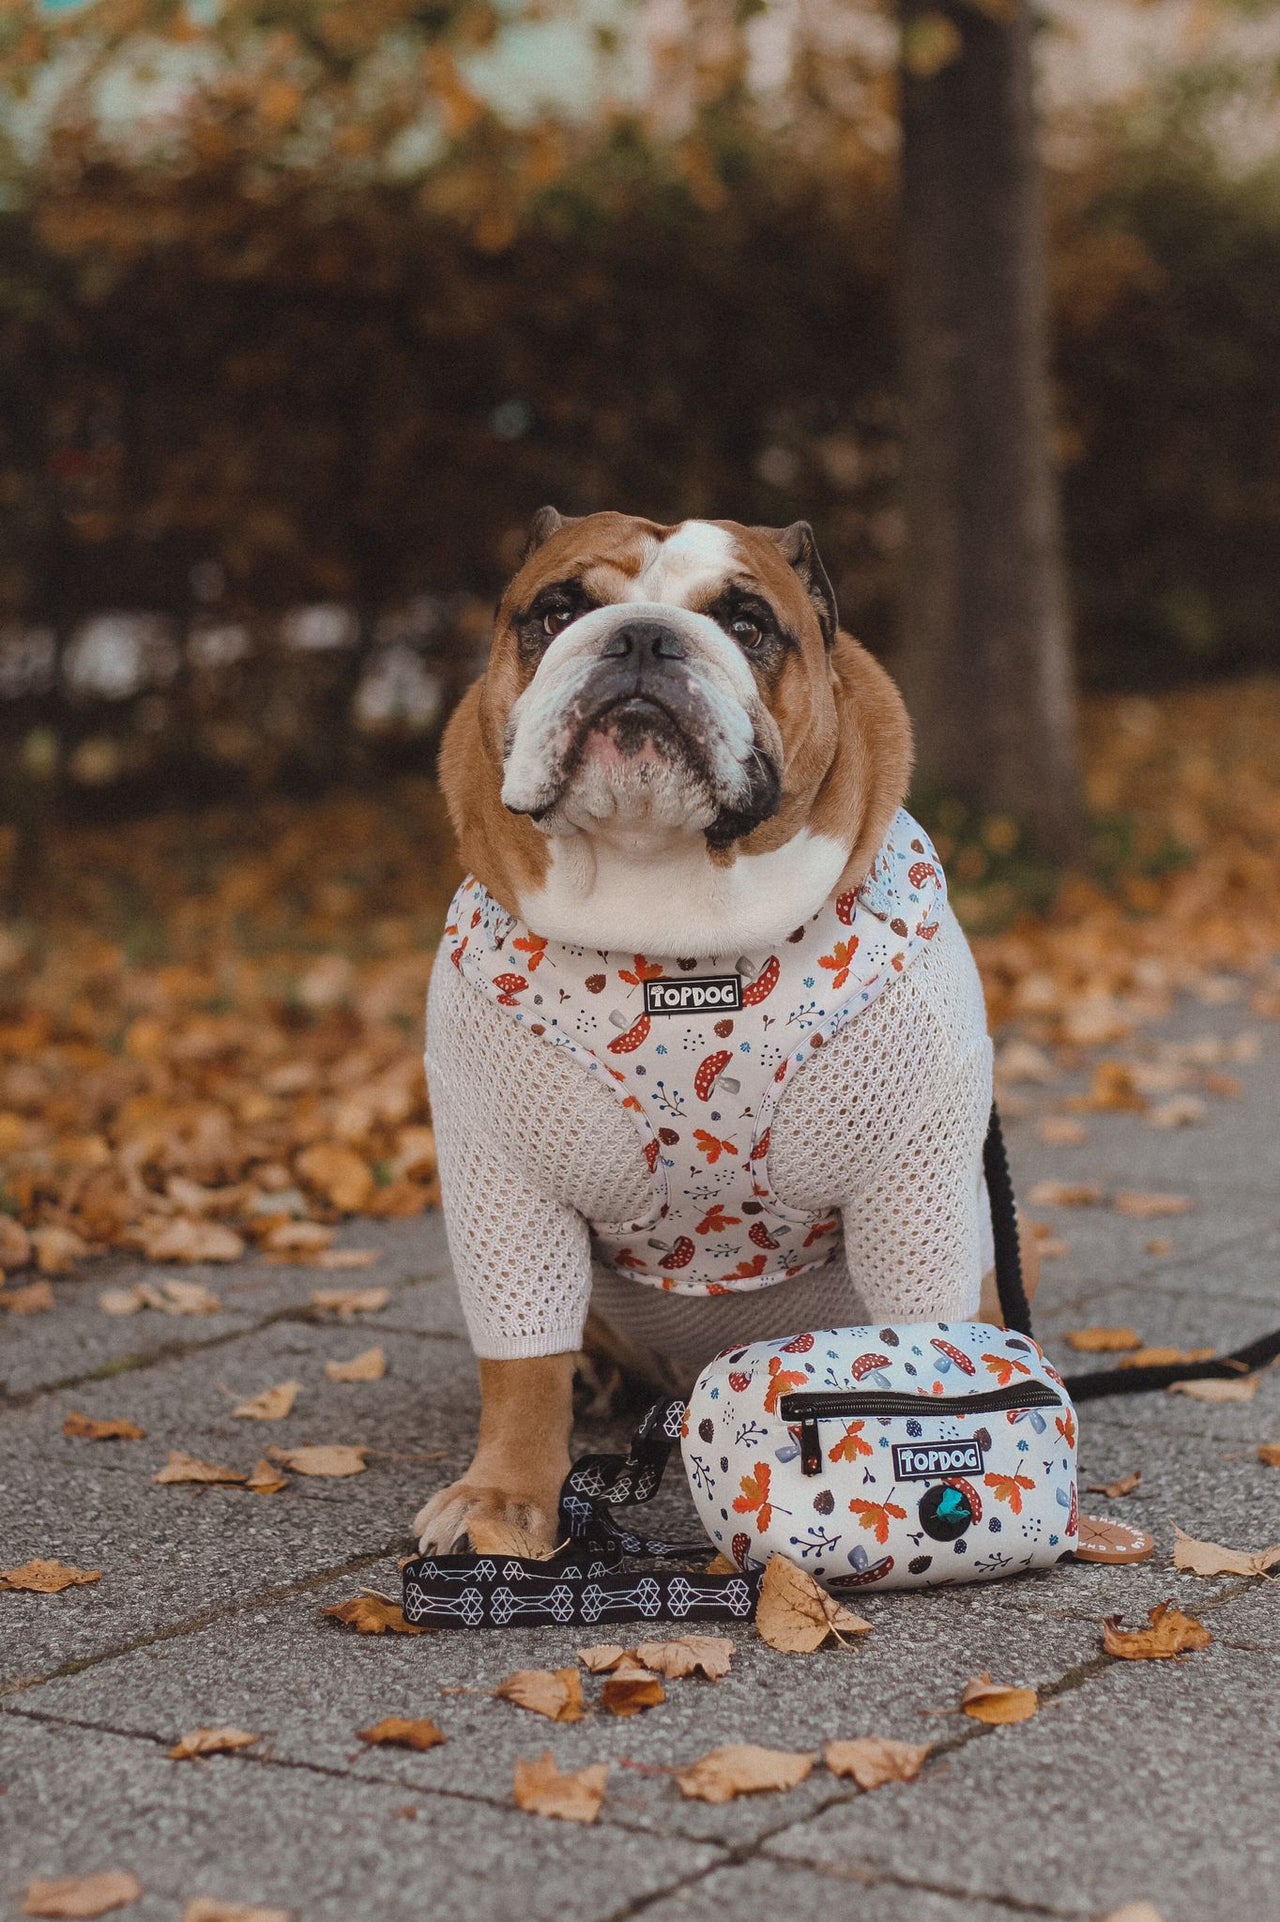 Bulldog with TopDog Harnesses Matching Essential Dog walking bag sitting on a path with autumn leaves